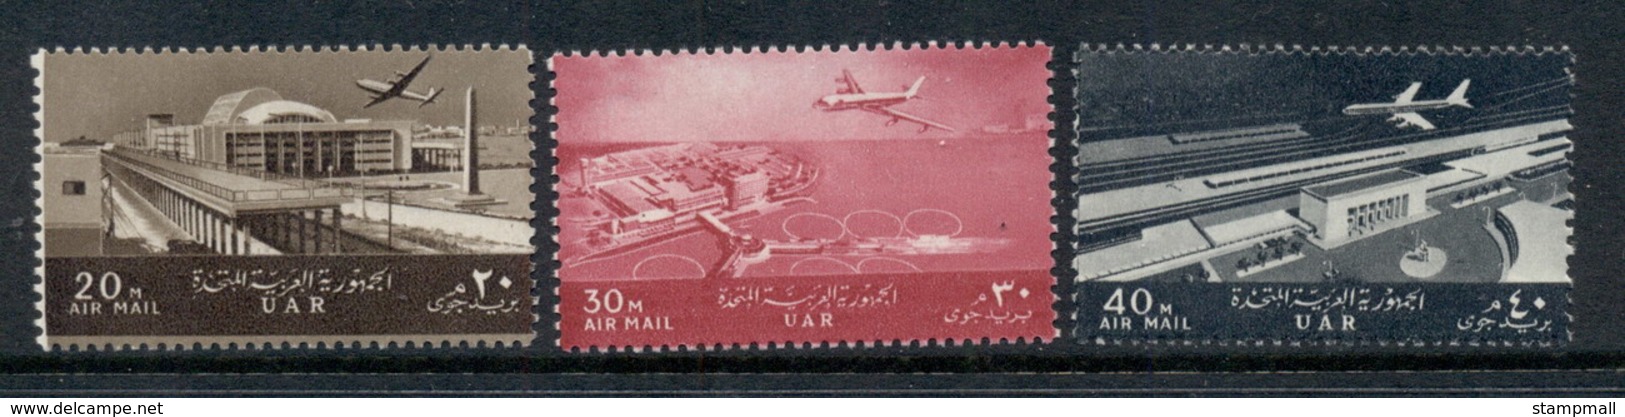 Egypt 1963 Air Mail MUH - Used Stamps